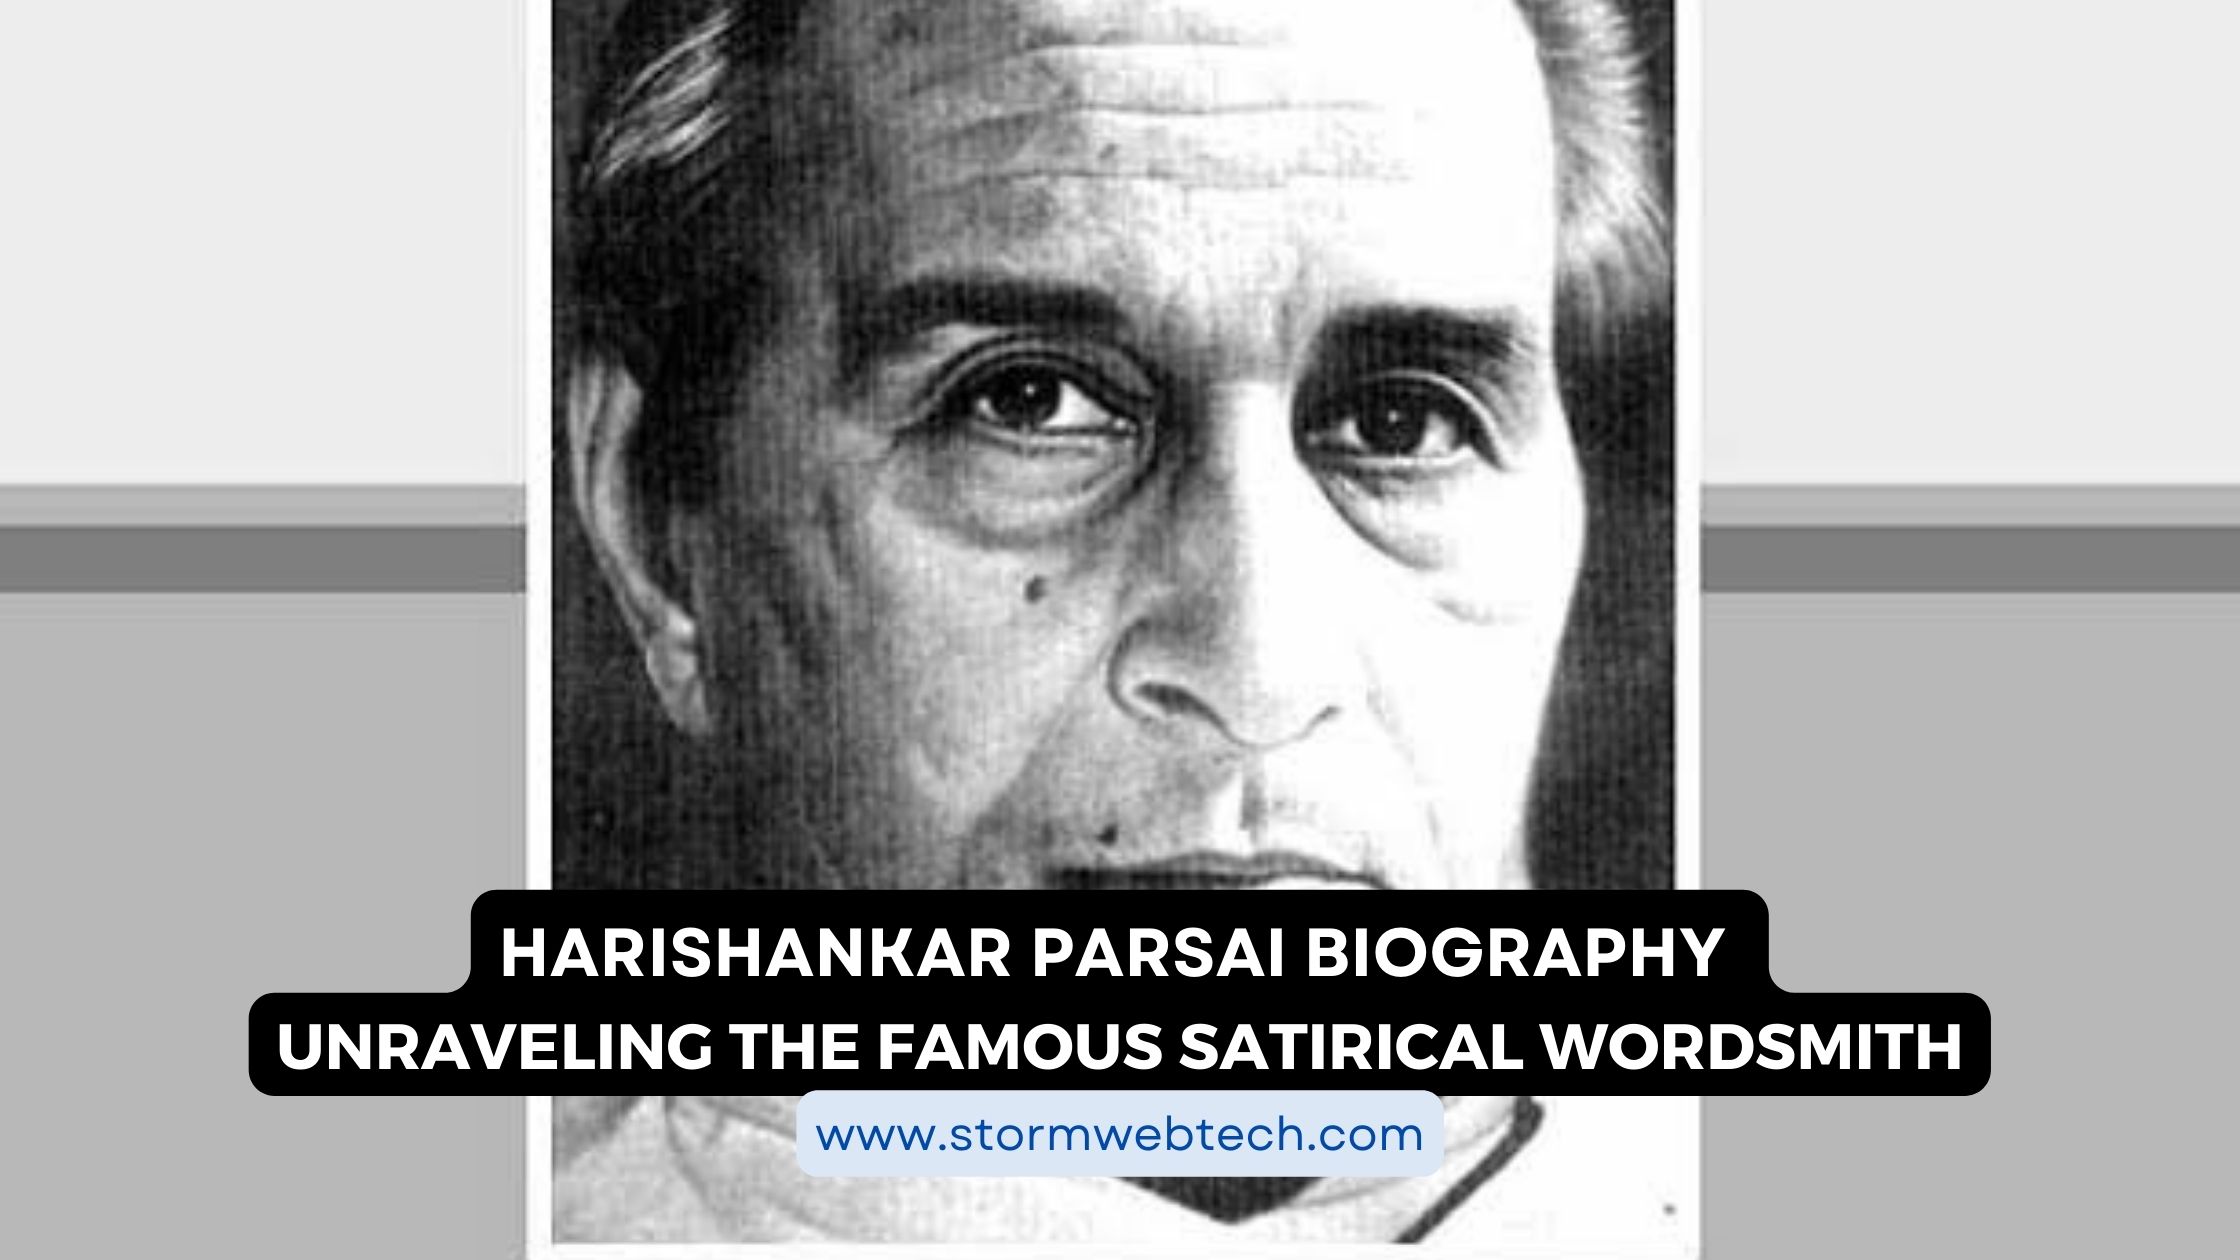 Harishankar Parsai's wit, humor, observations on society, politics, human nature have left an indelible mark on the landscape of Indian literature